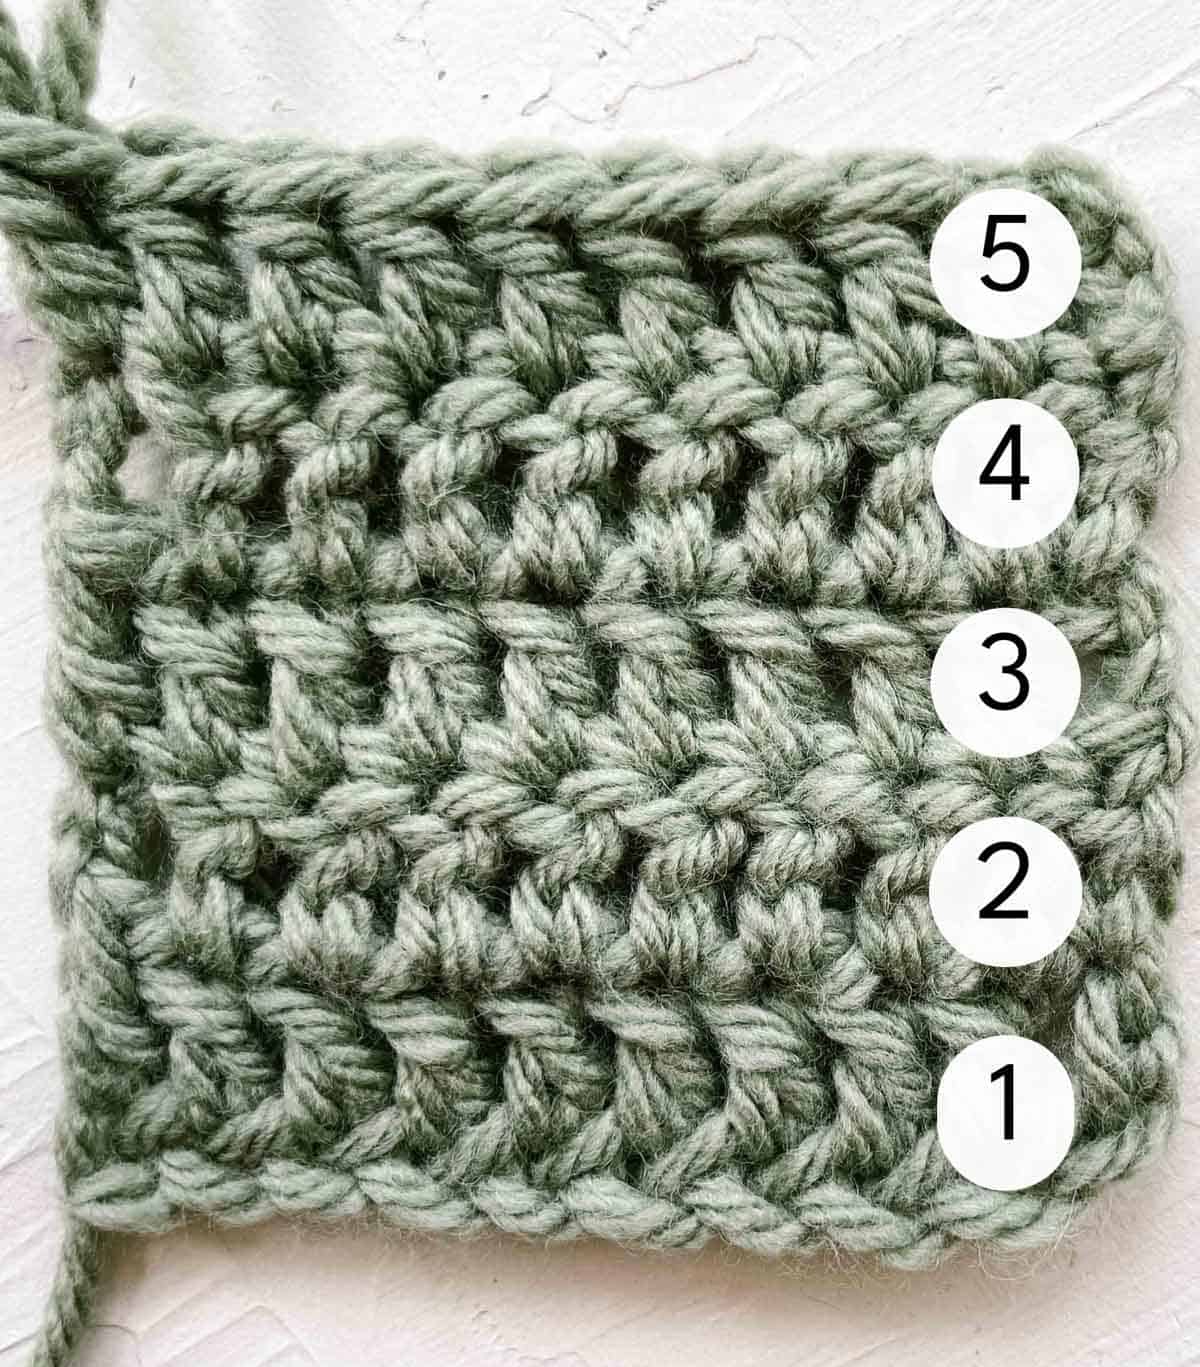 Diagram showing how to count rows of double crochet stitches.